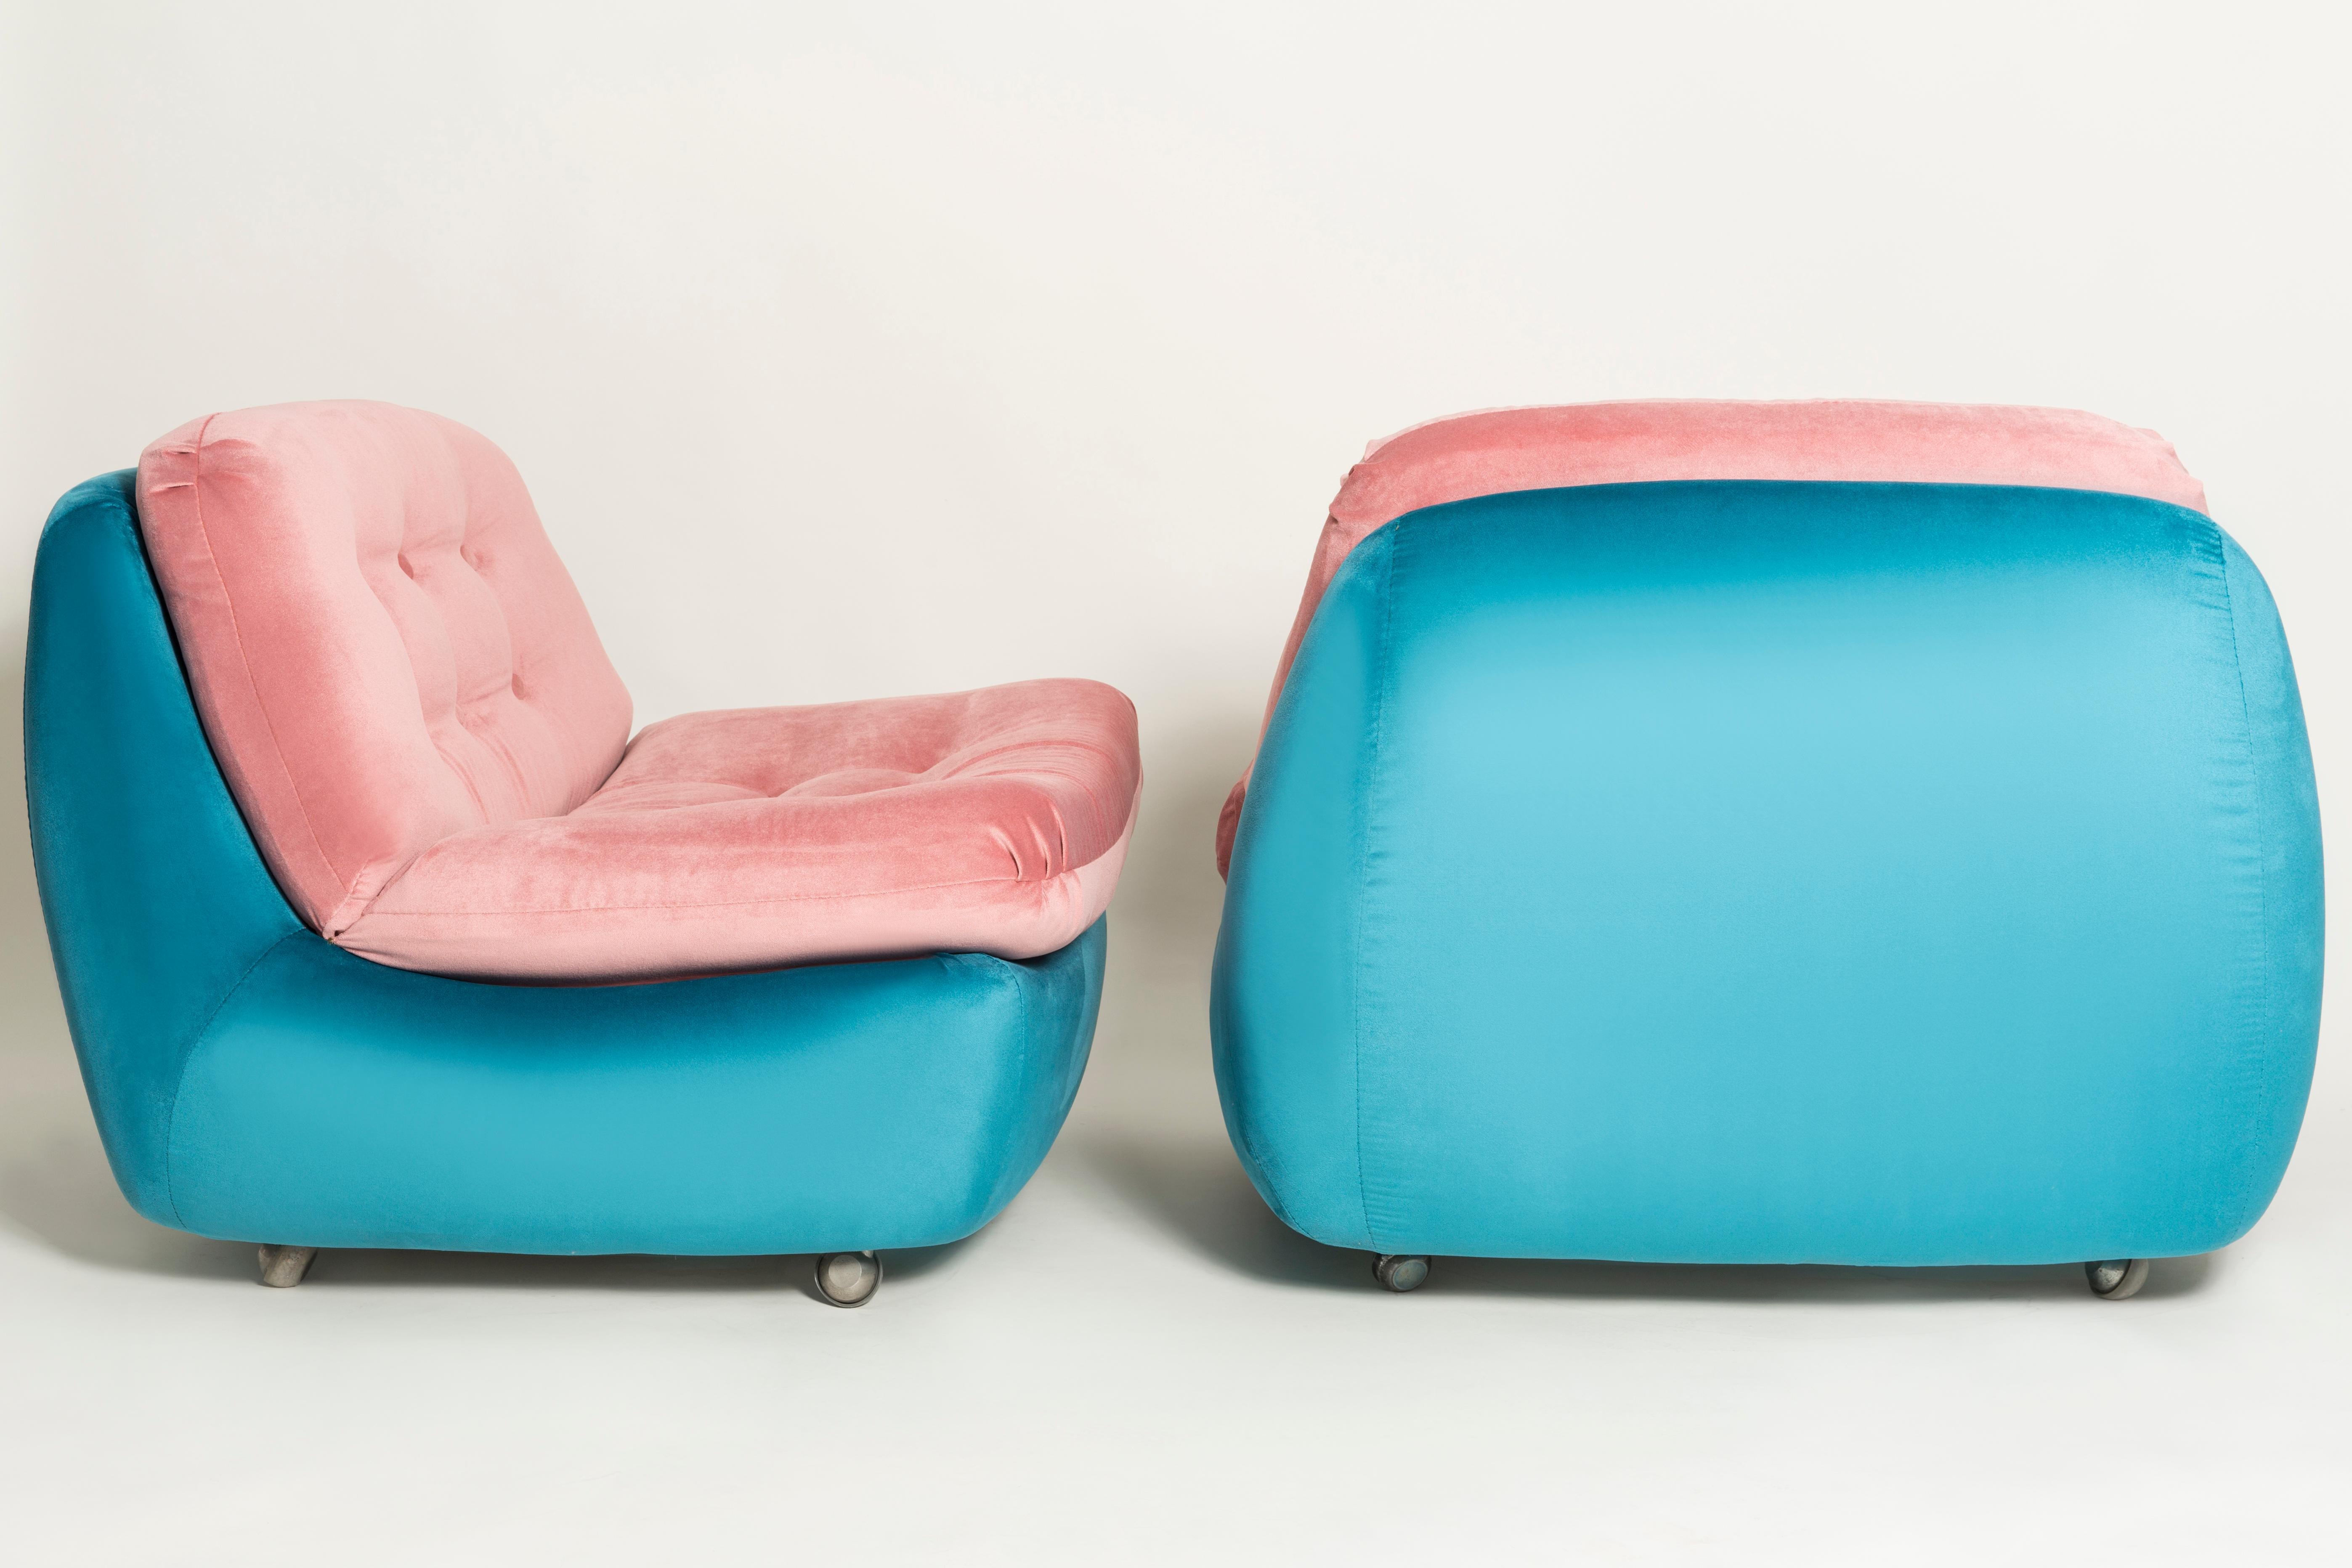 Hand-Crafted Set of Two 20th Century Vintage Pink and Blue Atlantis Armchairs, 1960s For Sale